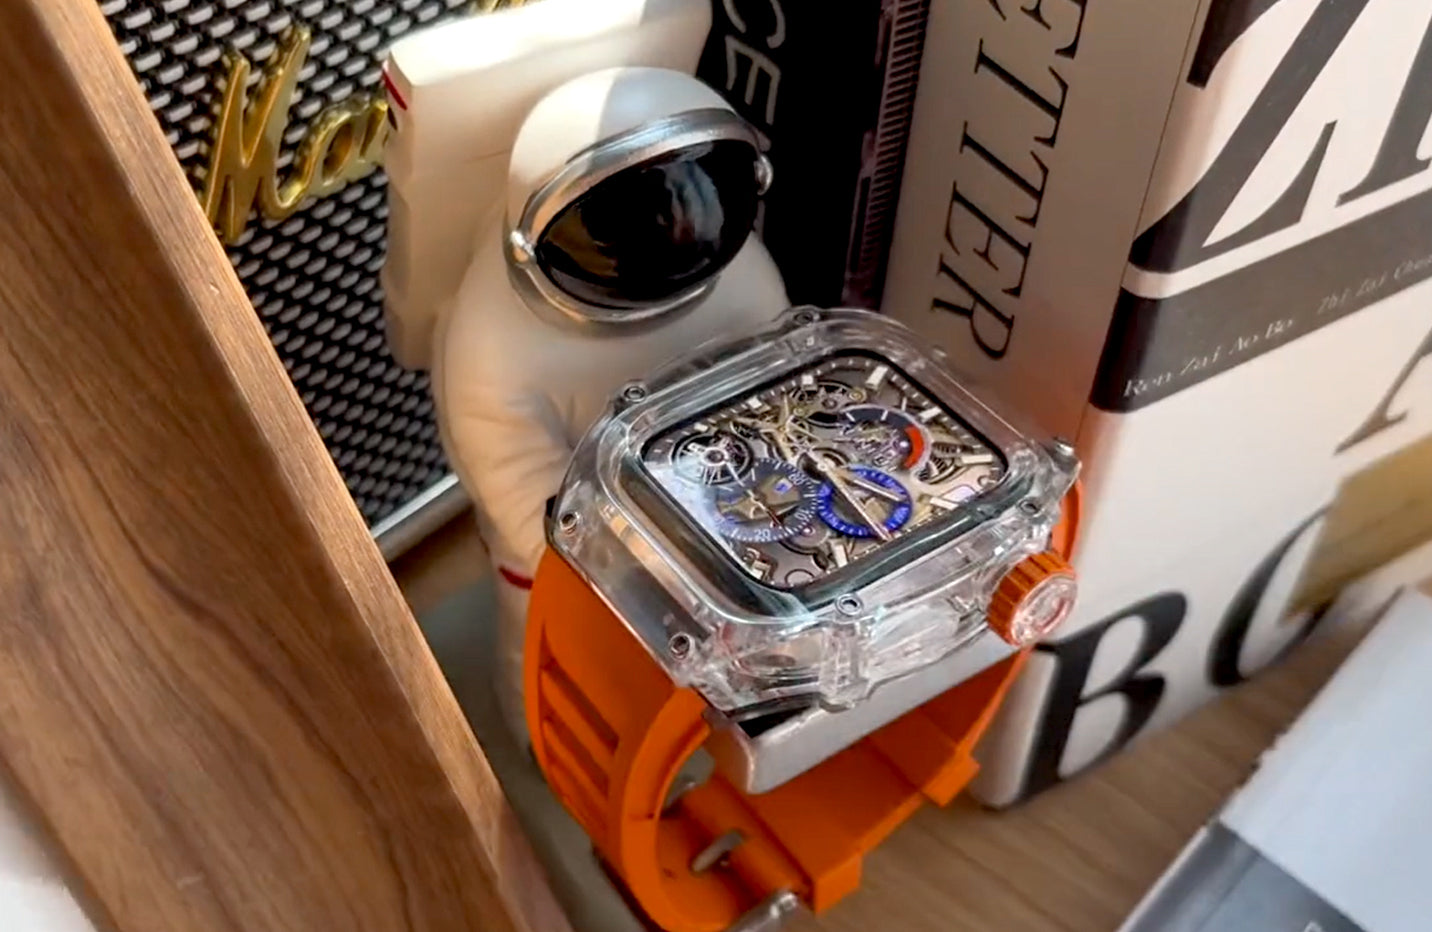 An Astronaut holding an Apple Watch which applied Kewsuma Ice Cube Transparent Apple Watch Case with Fluorescent Orange watch strap